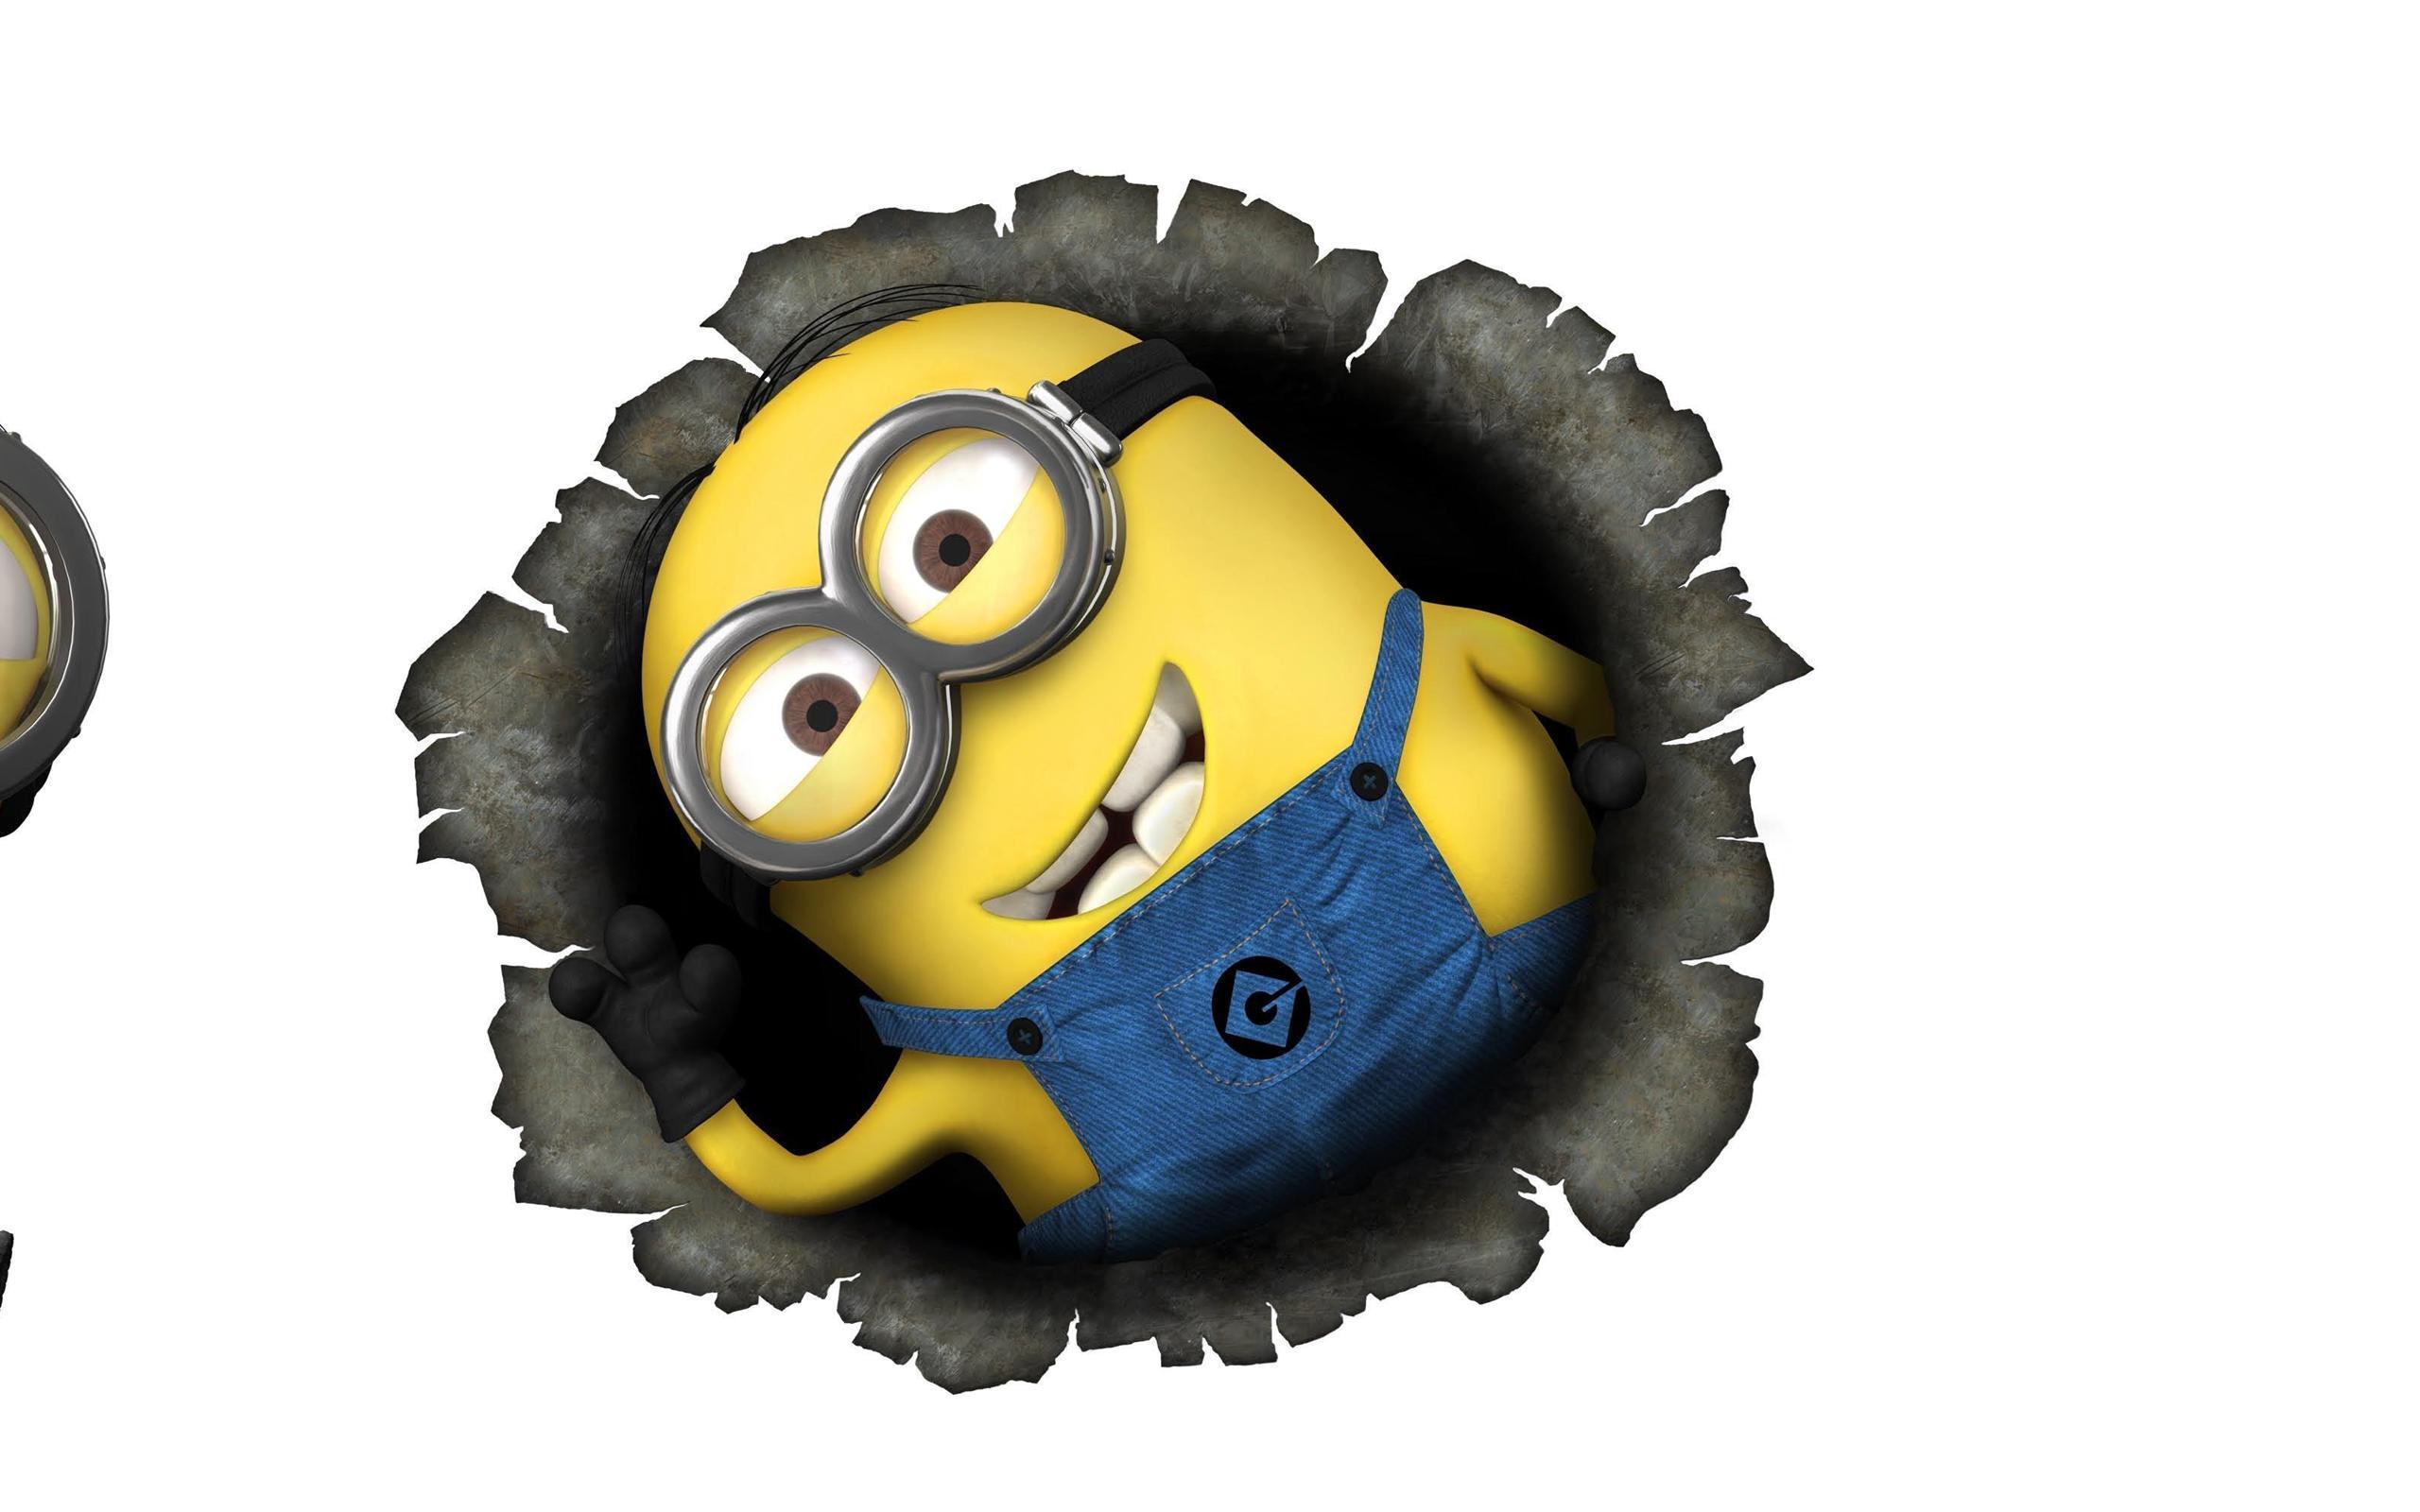 Despicable Me Minion Mayhem Wallpaper For Background